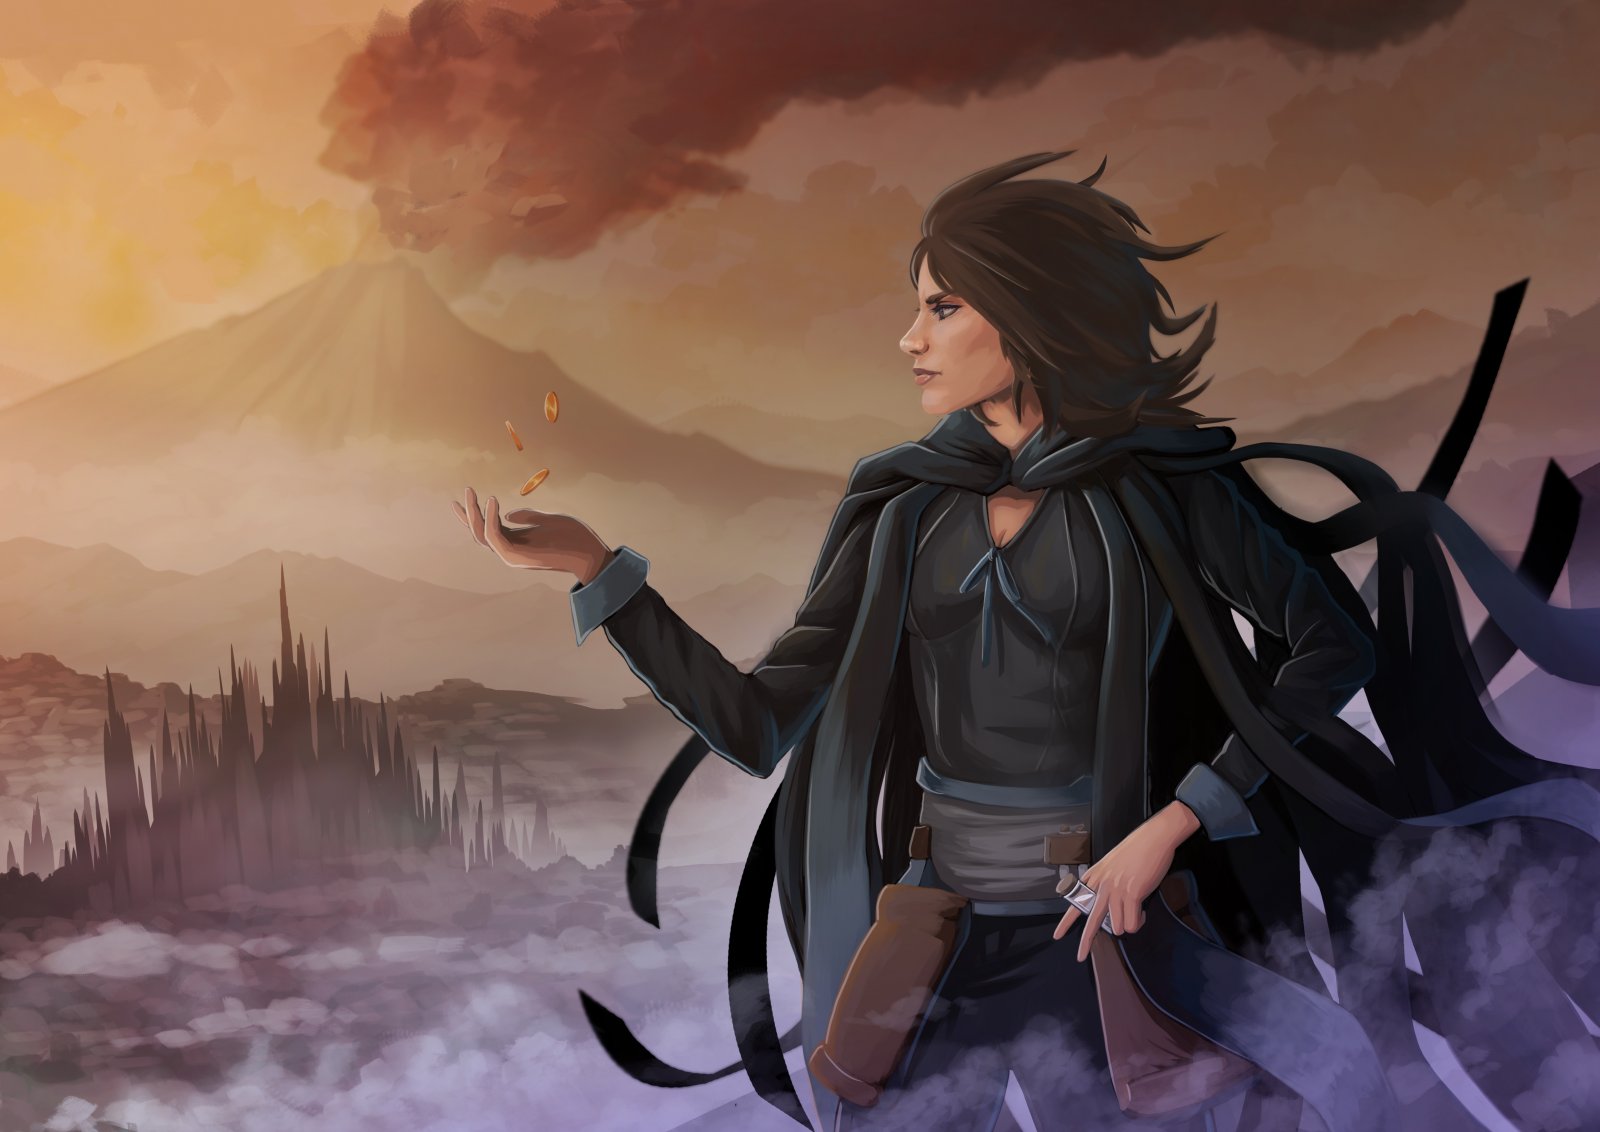 Vin From the Mistborn Series in the Brandon Sanderson Cosmere 